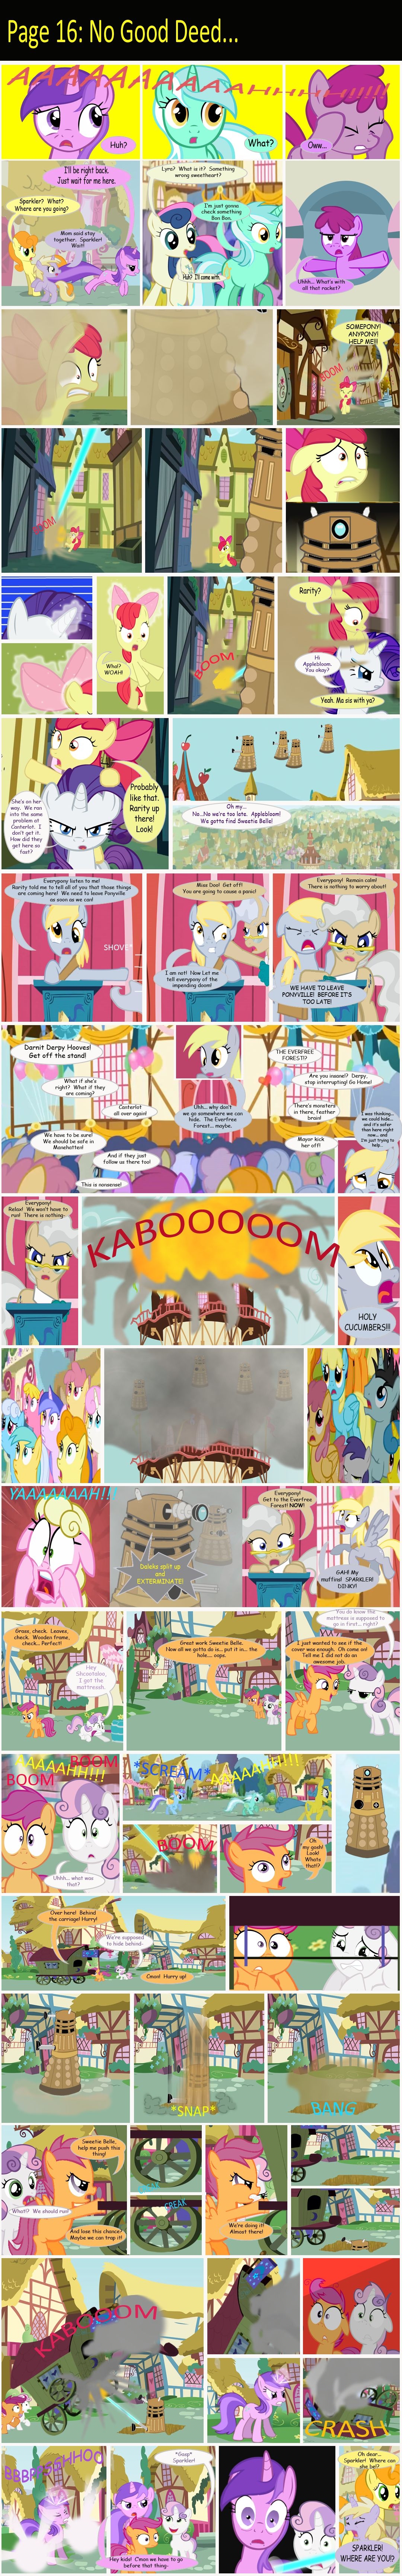 [ShwiggityShwah] Doctor Whooves: Elder (My Little Pony: Friendship is Magic) [English] [Ongoing] 15